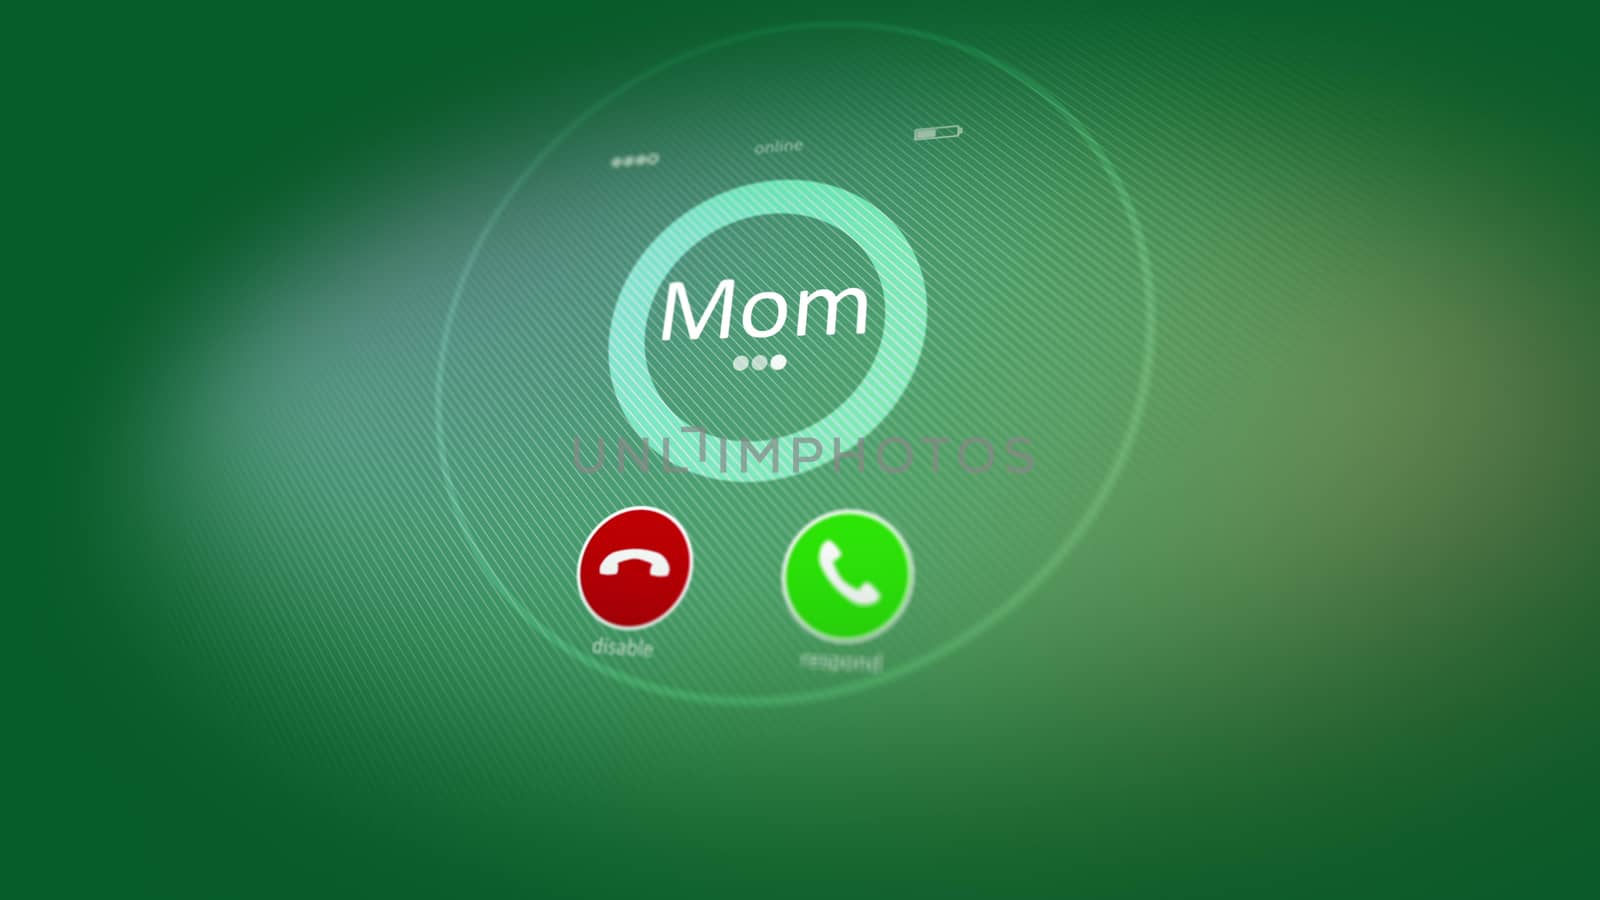 Hearty 3d rendering of an abstract phone calling, where the Mom inscription is seen. Also there are disable, and respond signs, put in the light green background. Mother is calling!